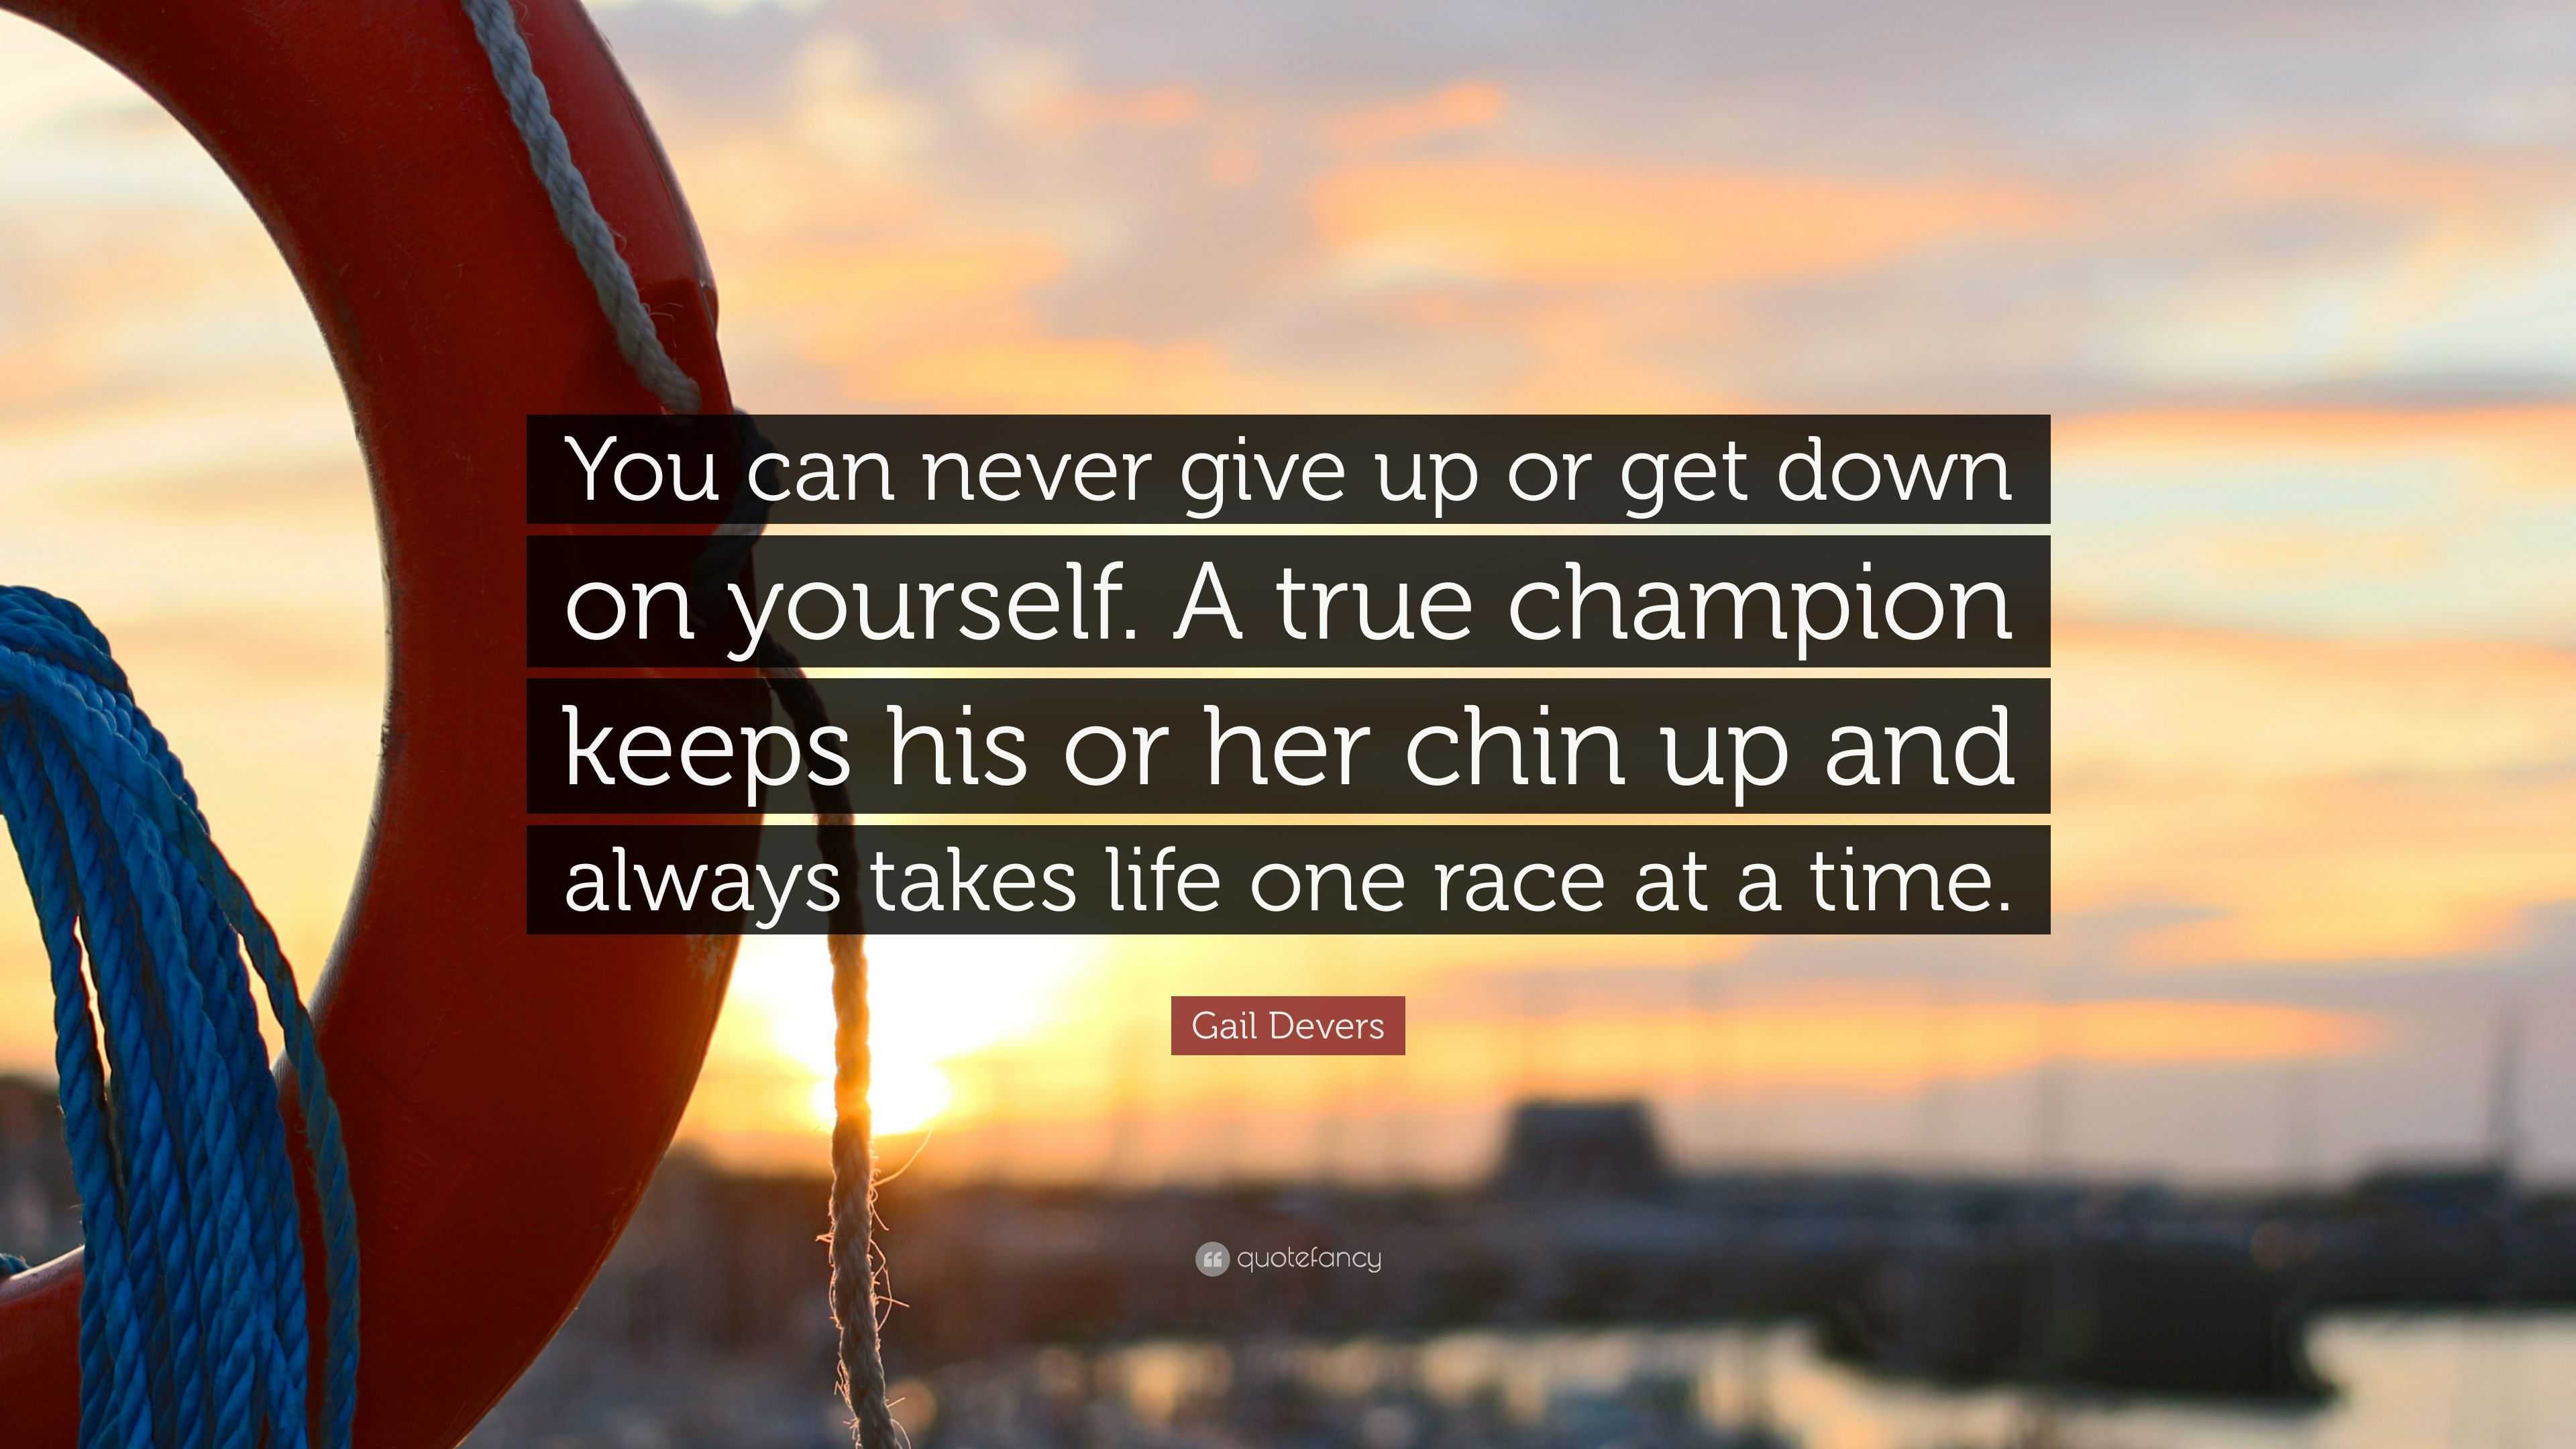 Gail Devers Quote “You can never give up or down on yourself